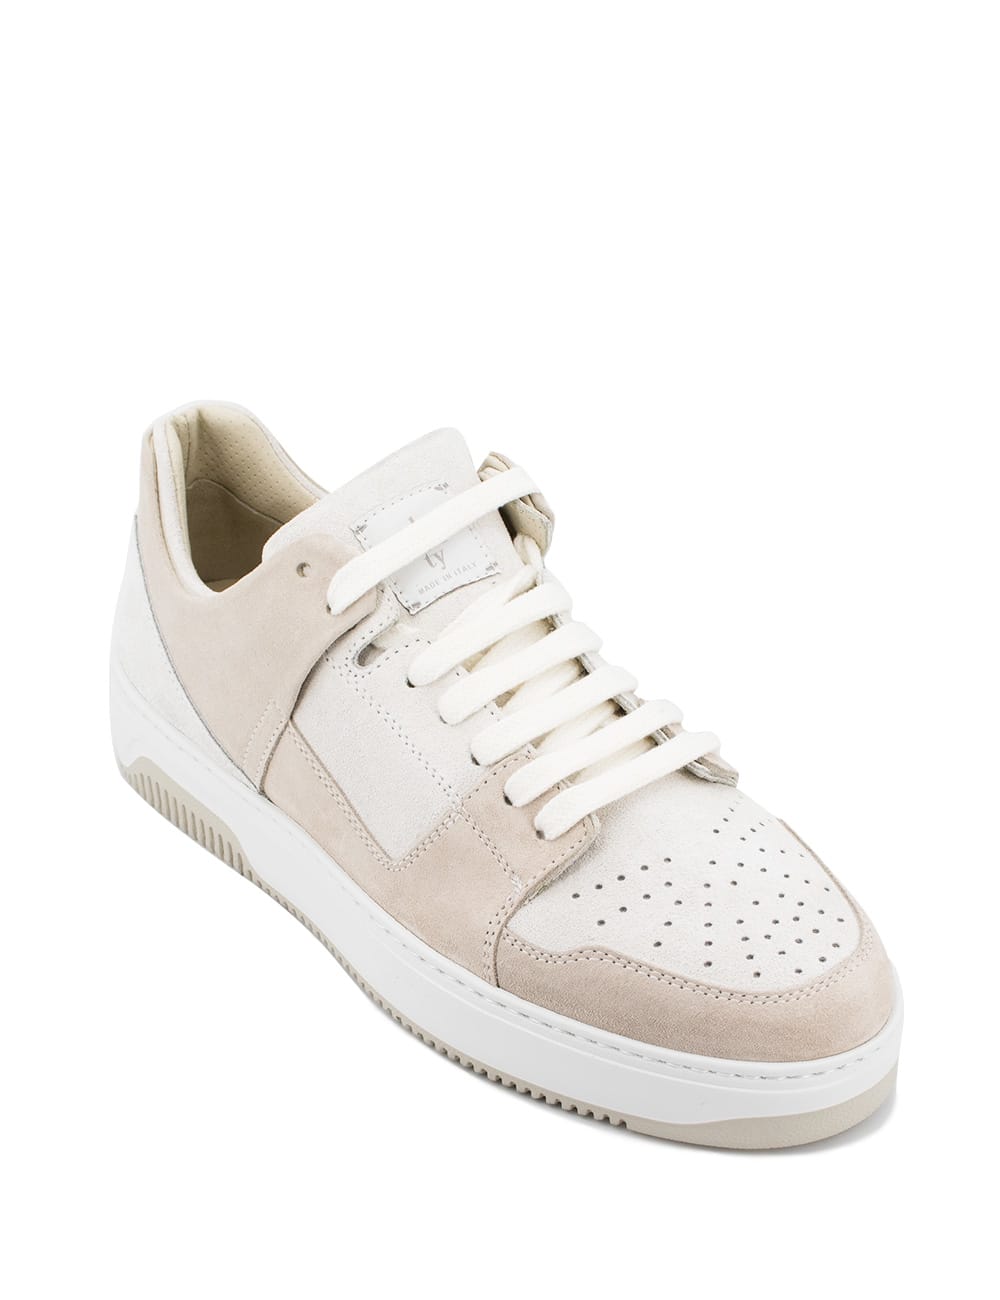 Shop Eleventy Sneakers In Sand And White